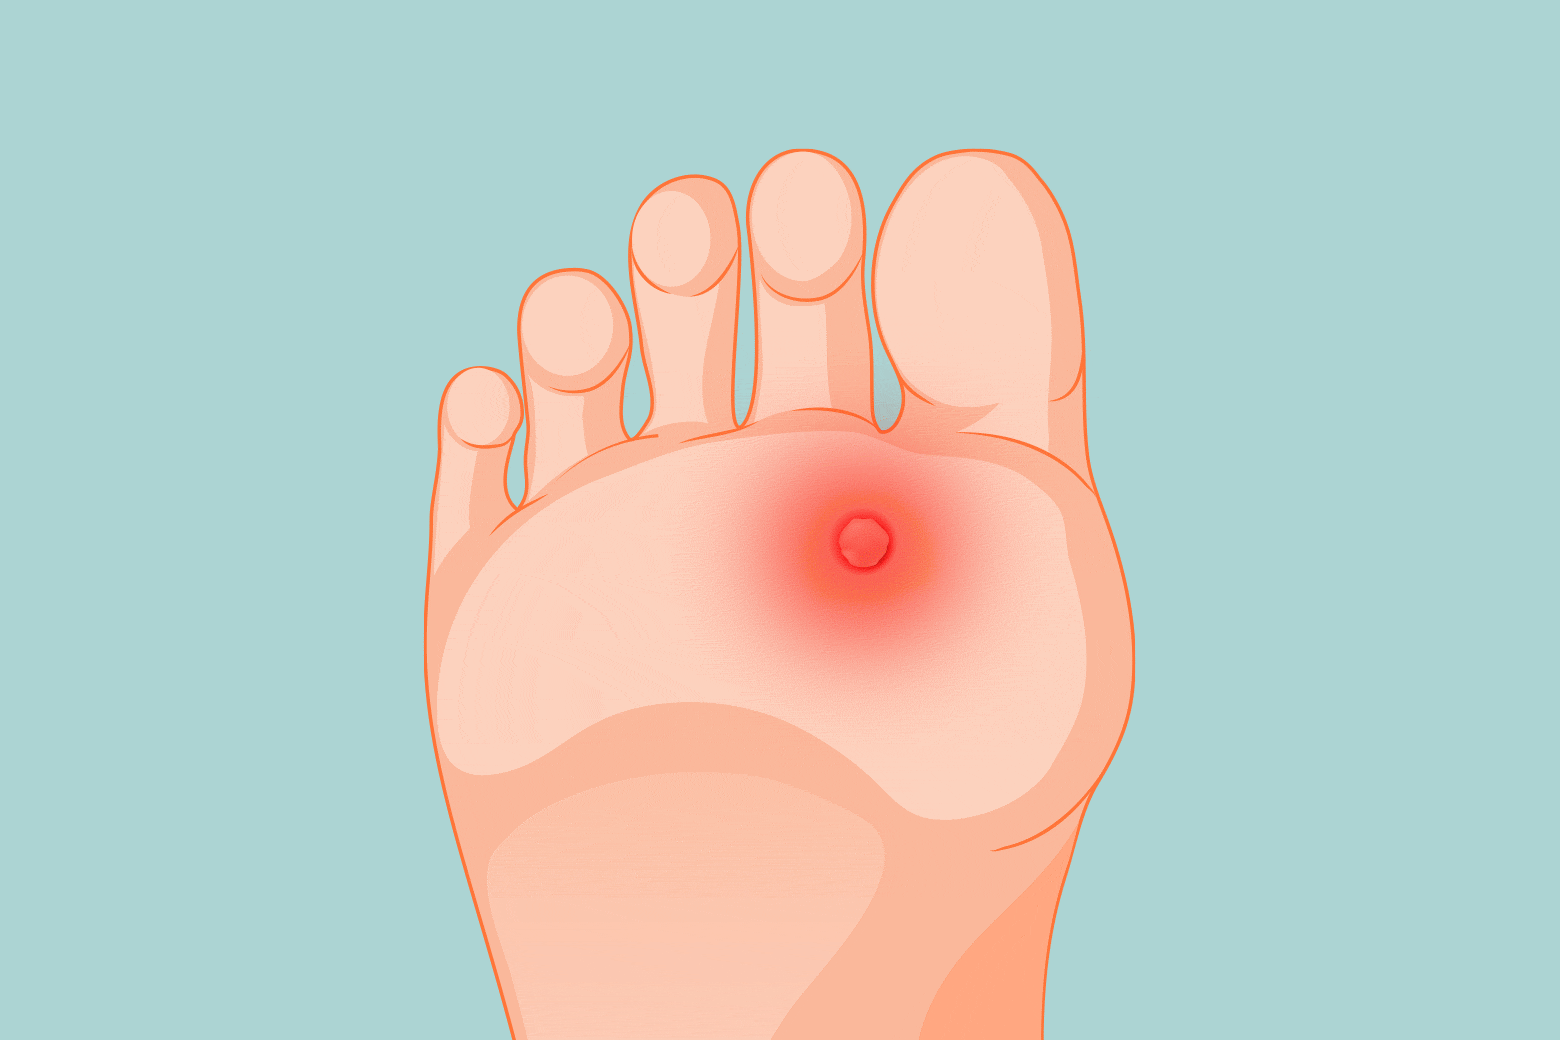 A pulsing red wart on an animated foot